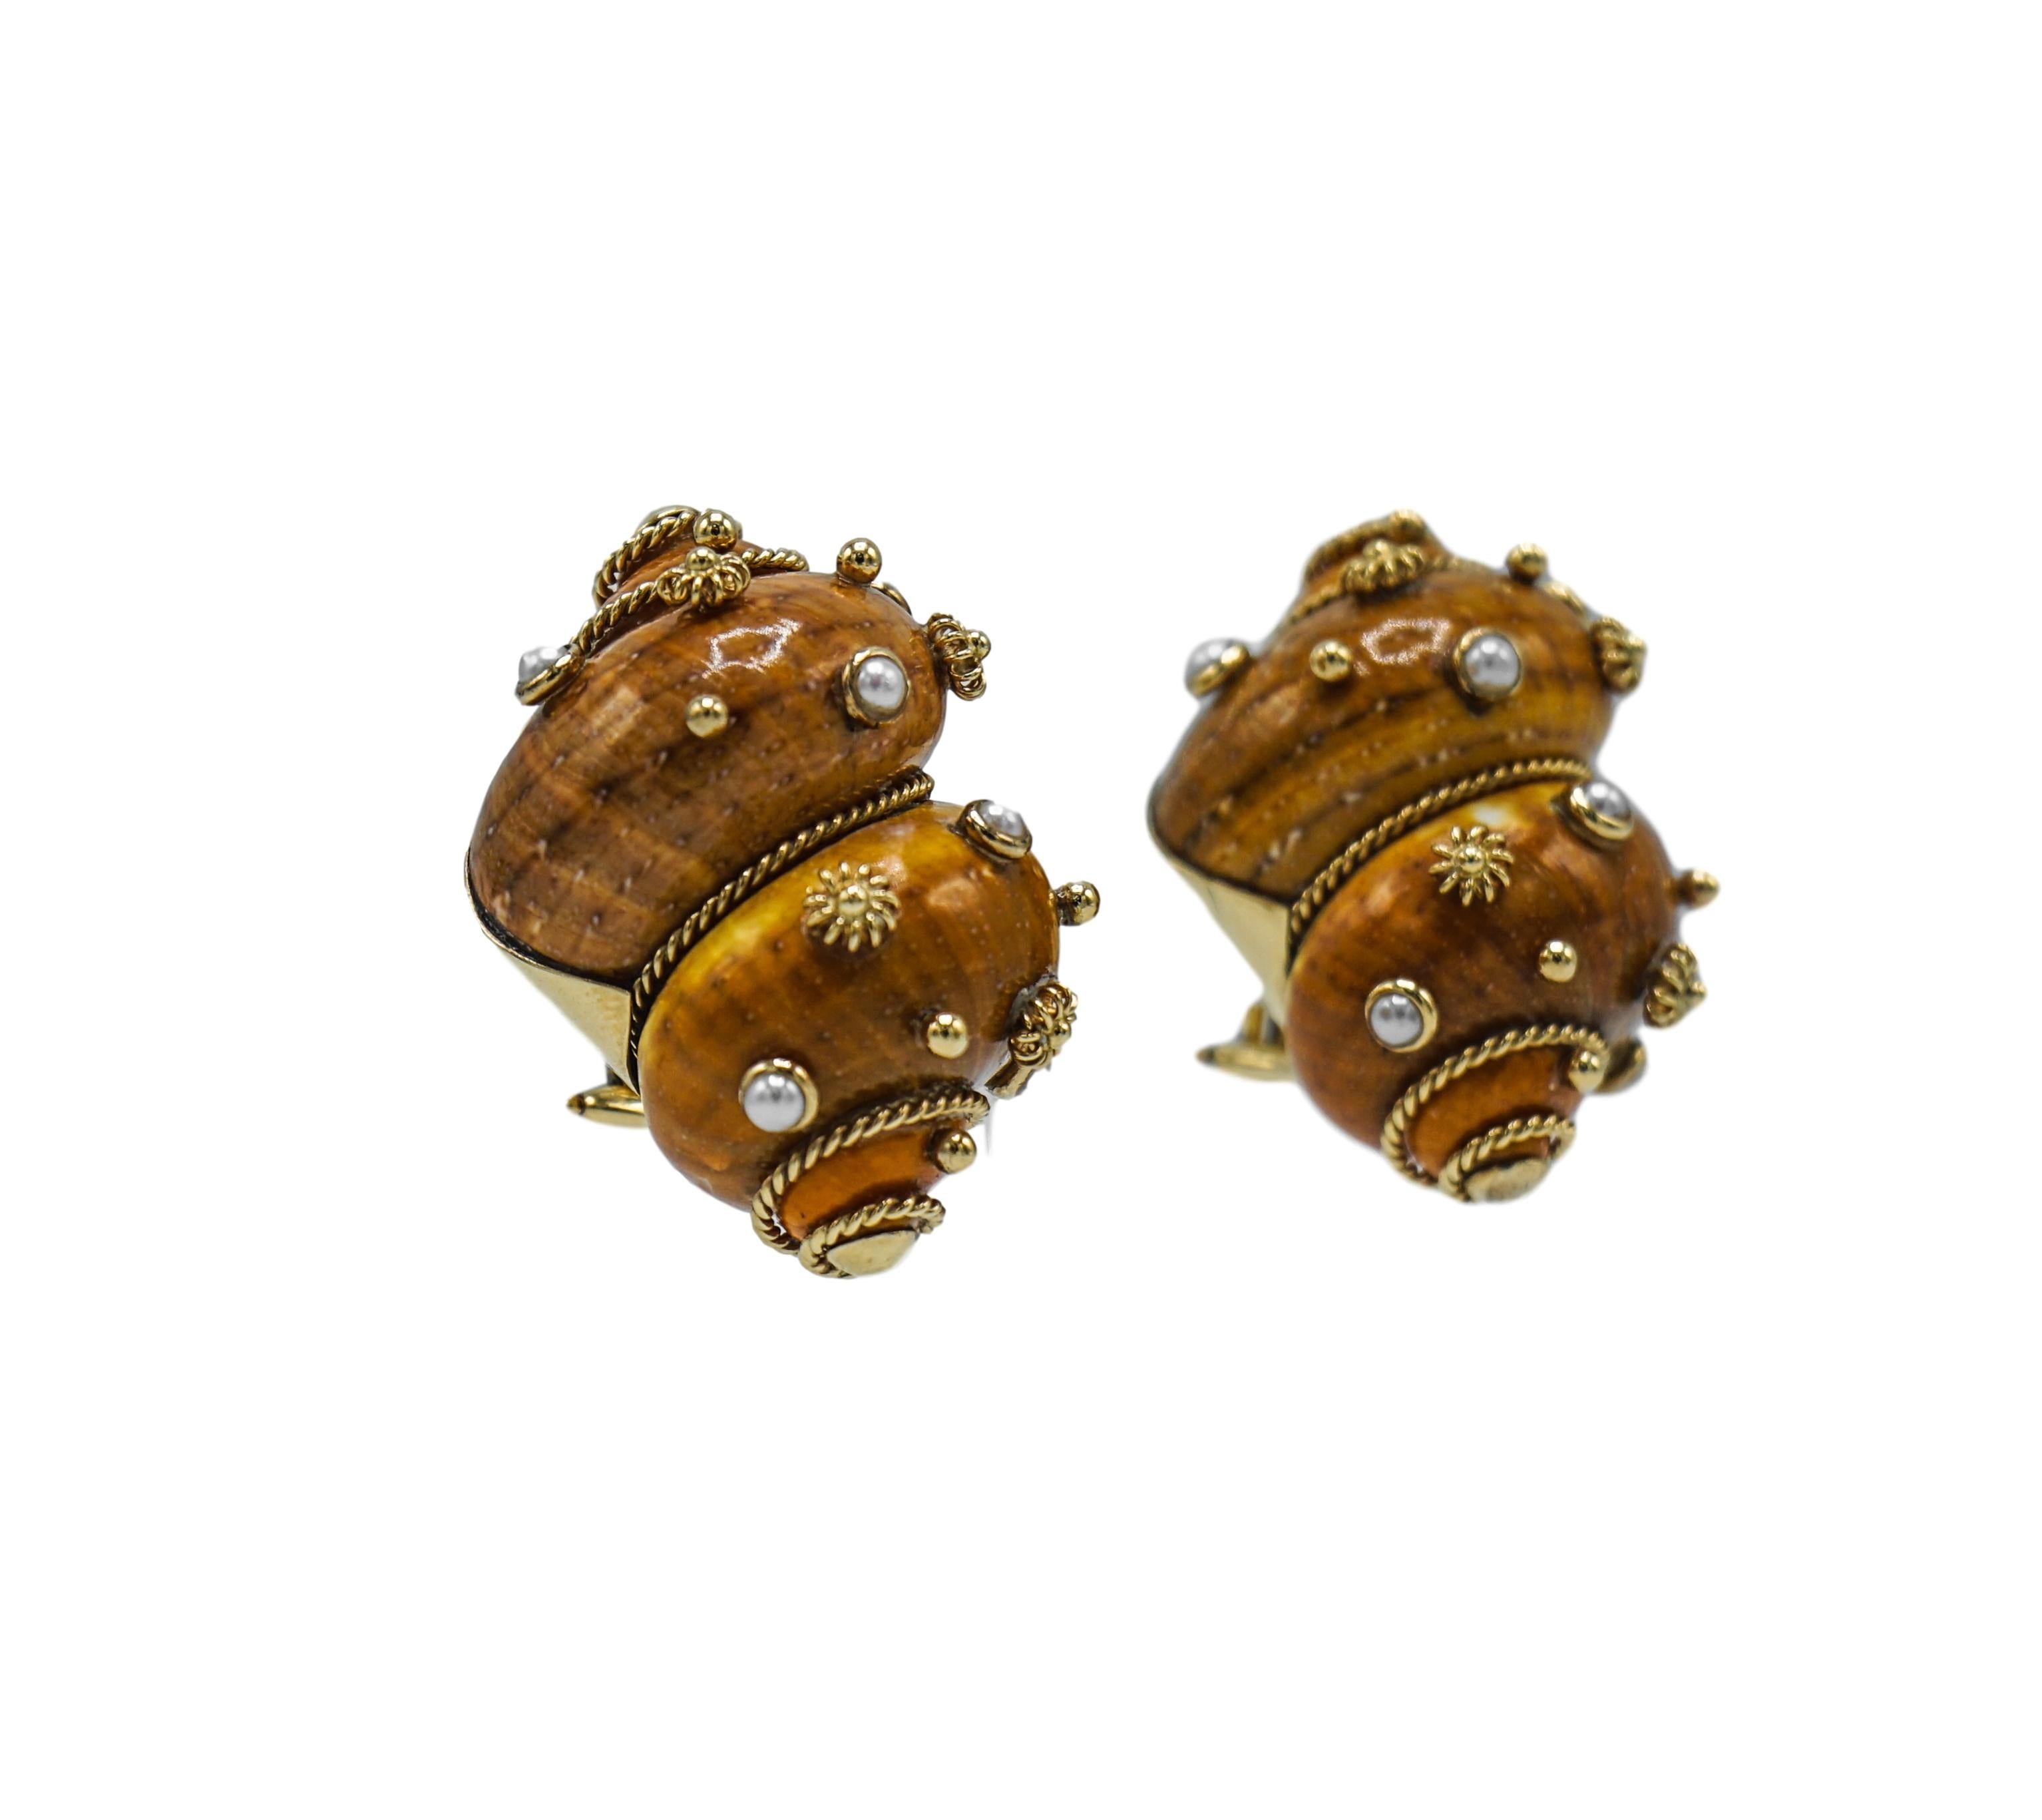 Pair of Gold, Shell and Cultured Pearl Earrings, Maz
14 kt., 2 brown shells ap. 34.0 x 23.0 mm., 12 pearls, signed Maz. 

PLEASE NOTE THAT ONE SHELL HAS A HAIRLINE CRACK AND CHIP. 